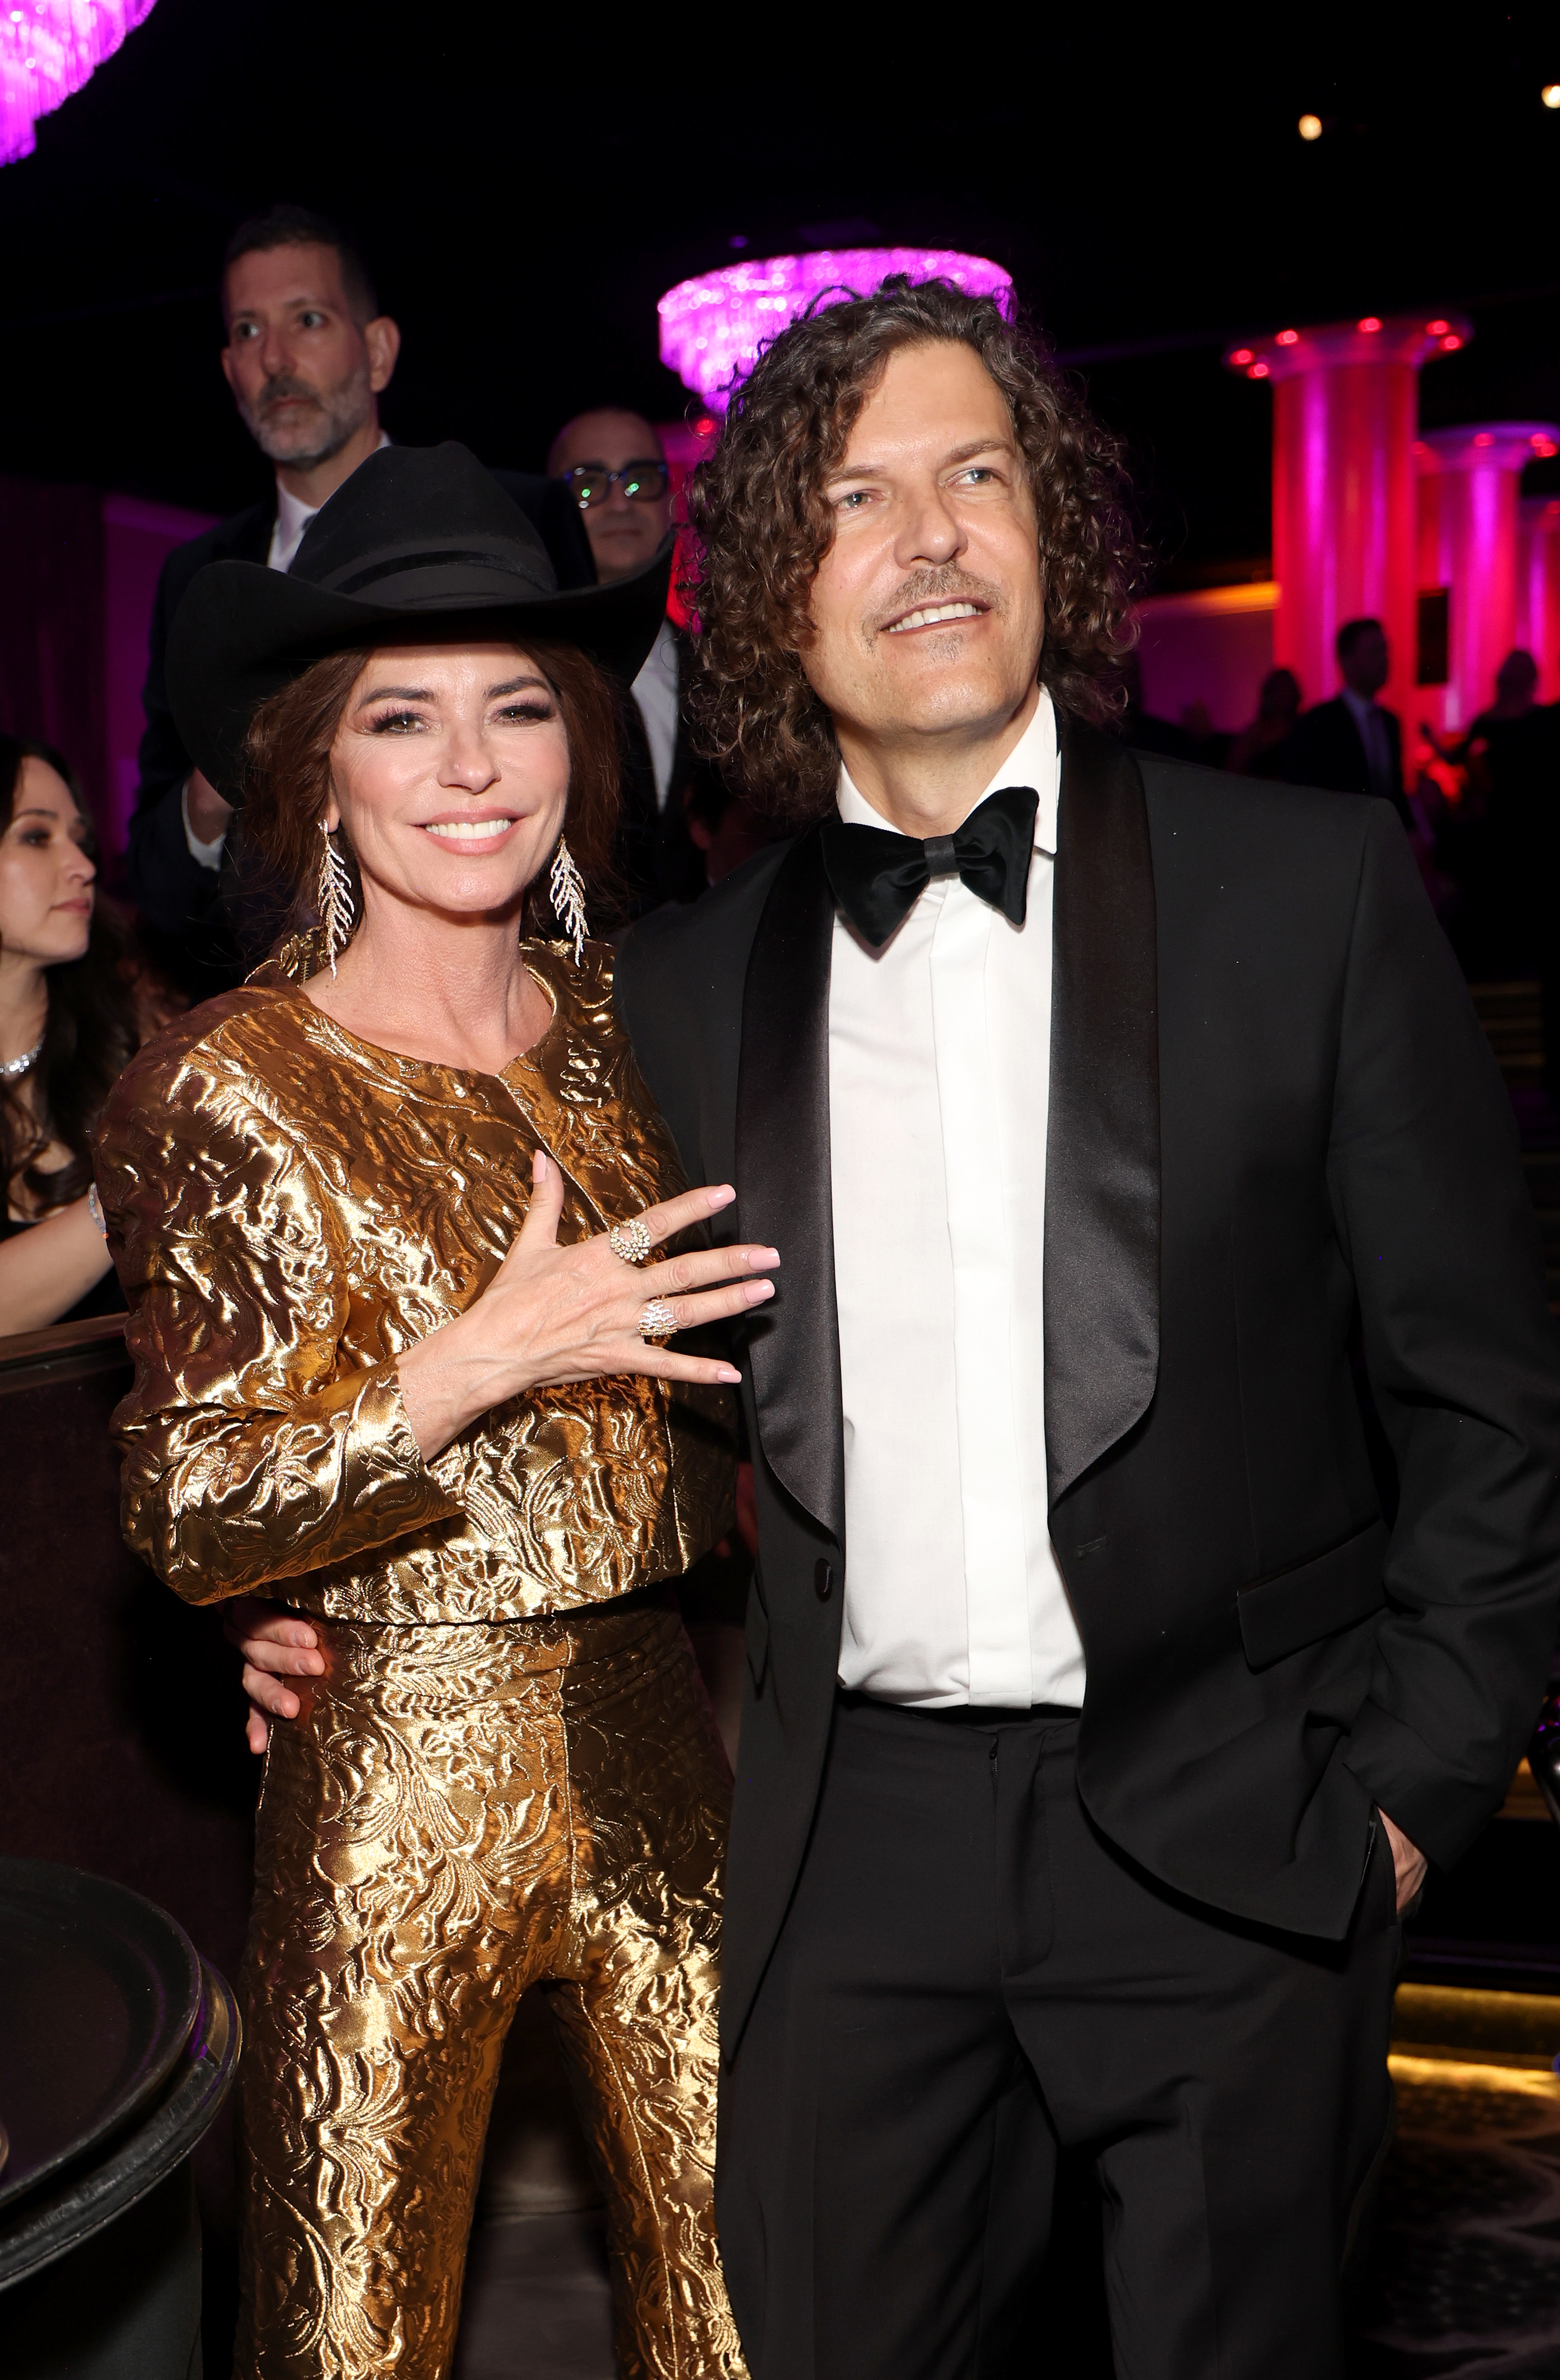 Shania is now married to Marie-Anne's ex-husband, Frederic Thiébaud